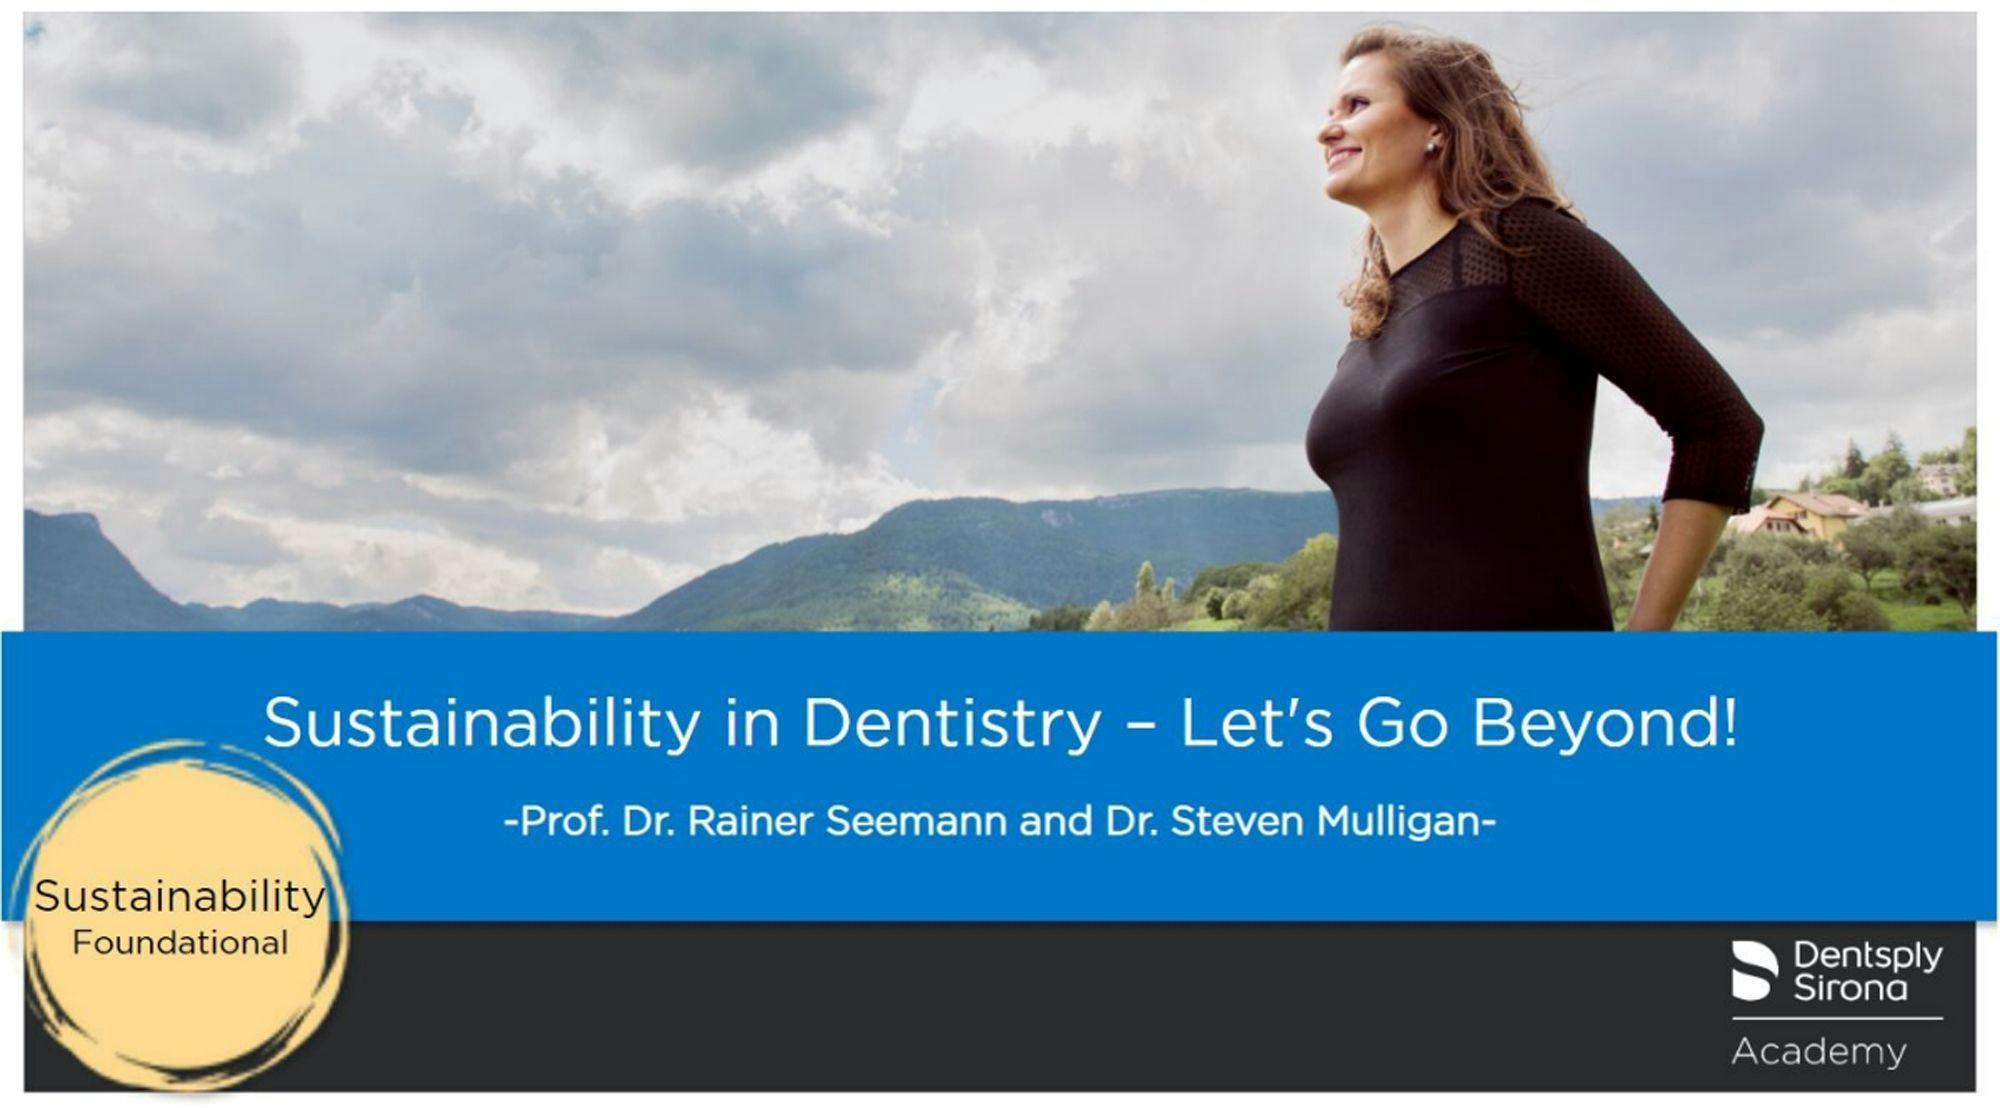 Dentsply Sirona Launches Sustainability Educational Curriculum for Dental Professionals